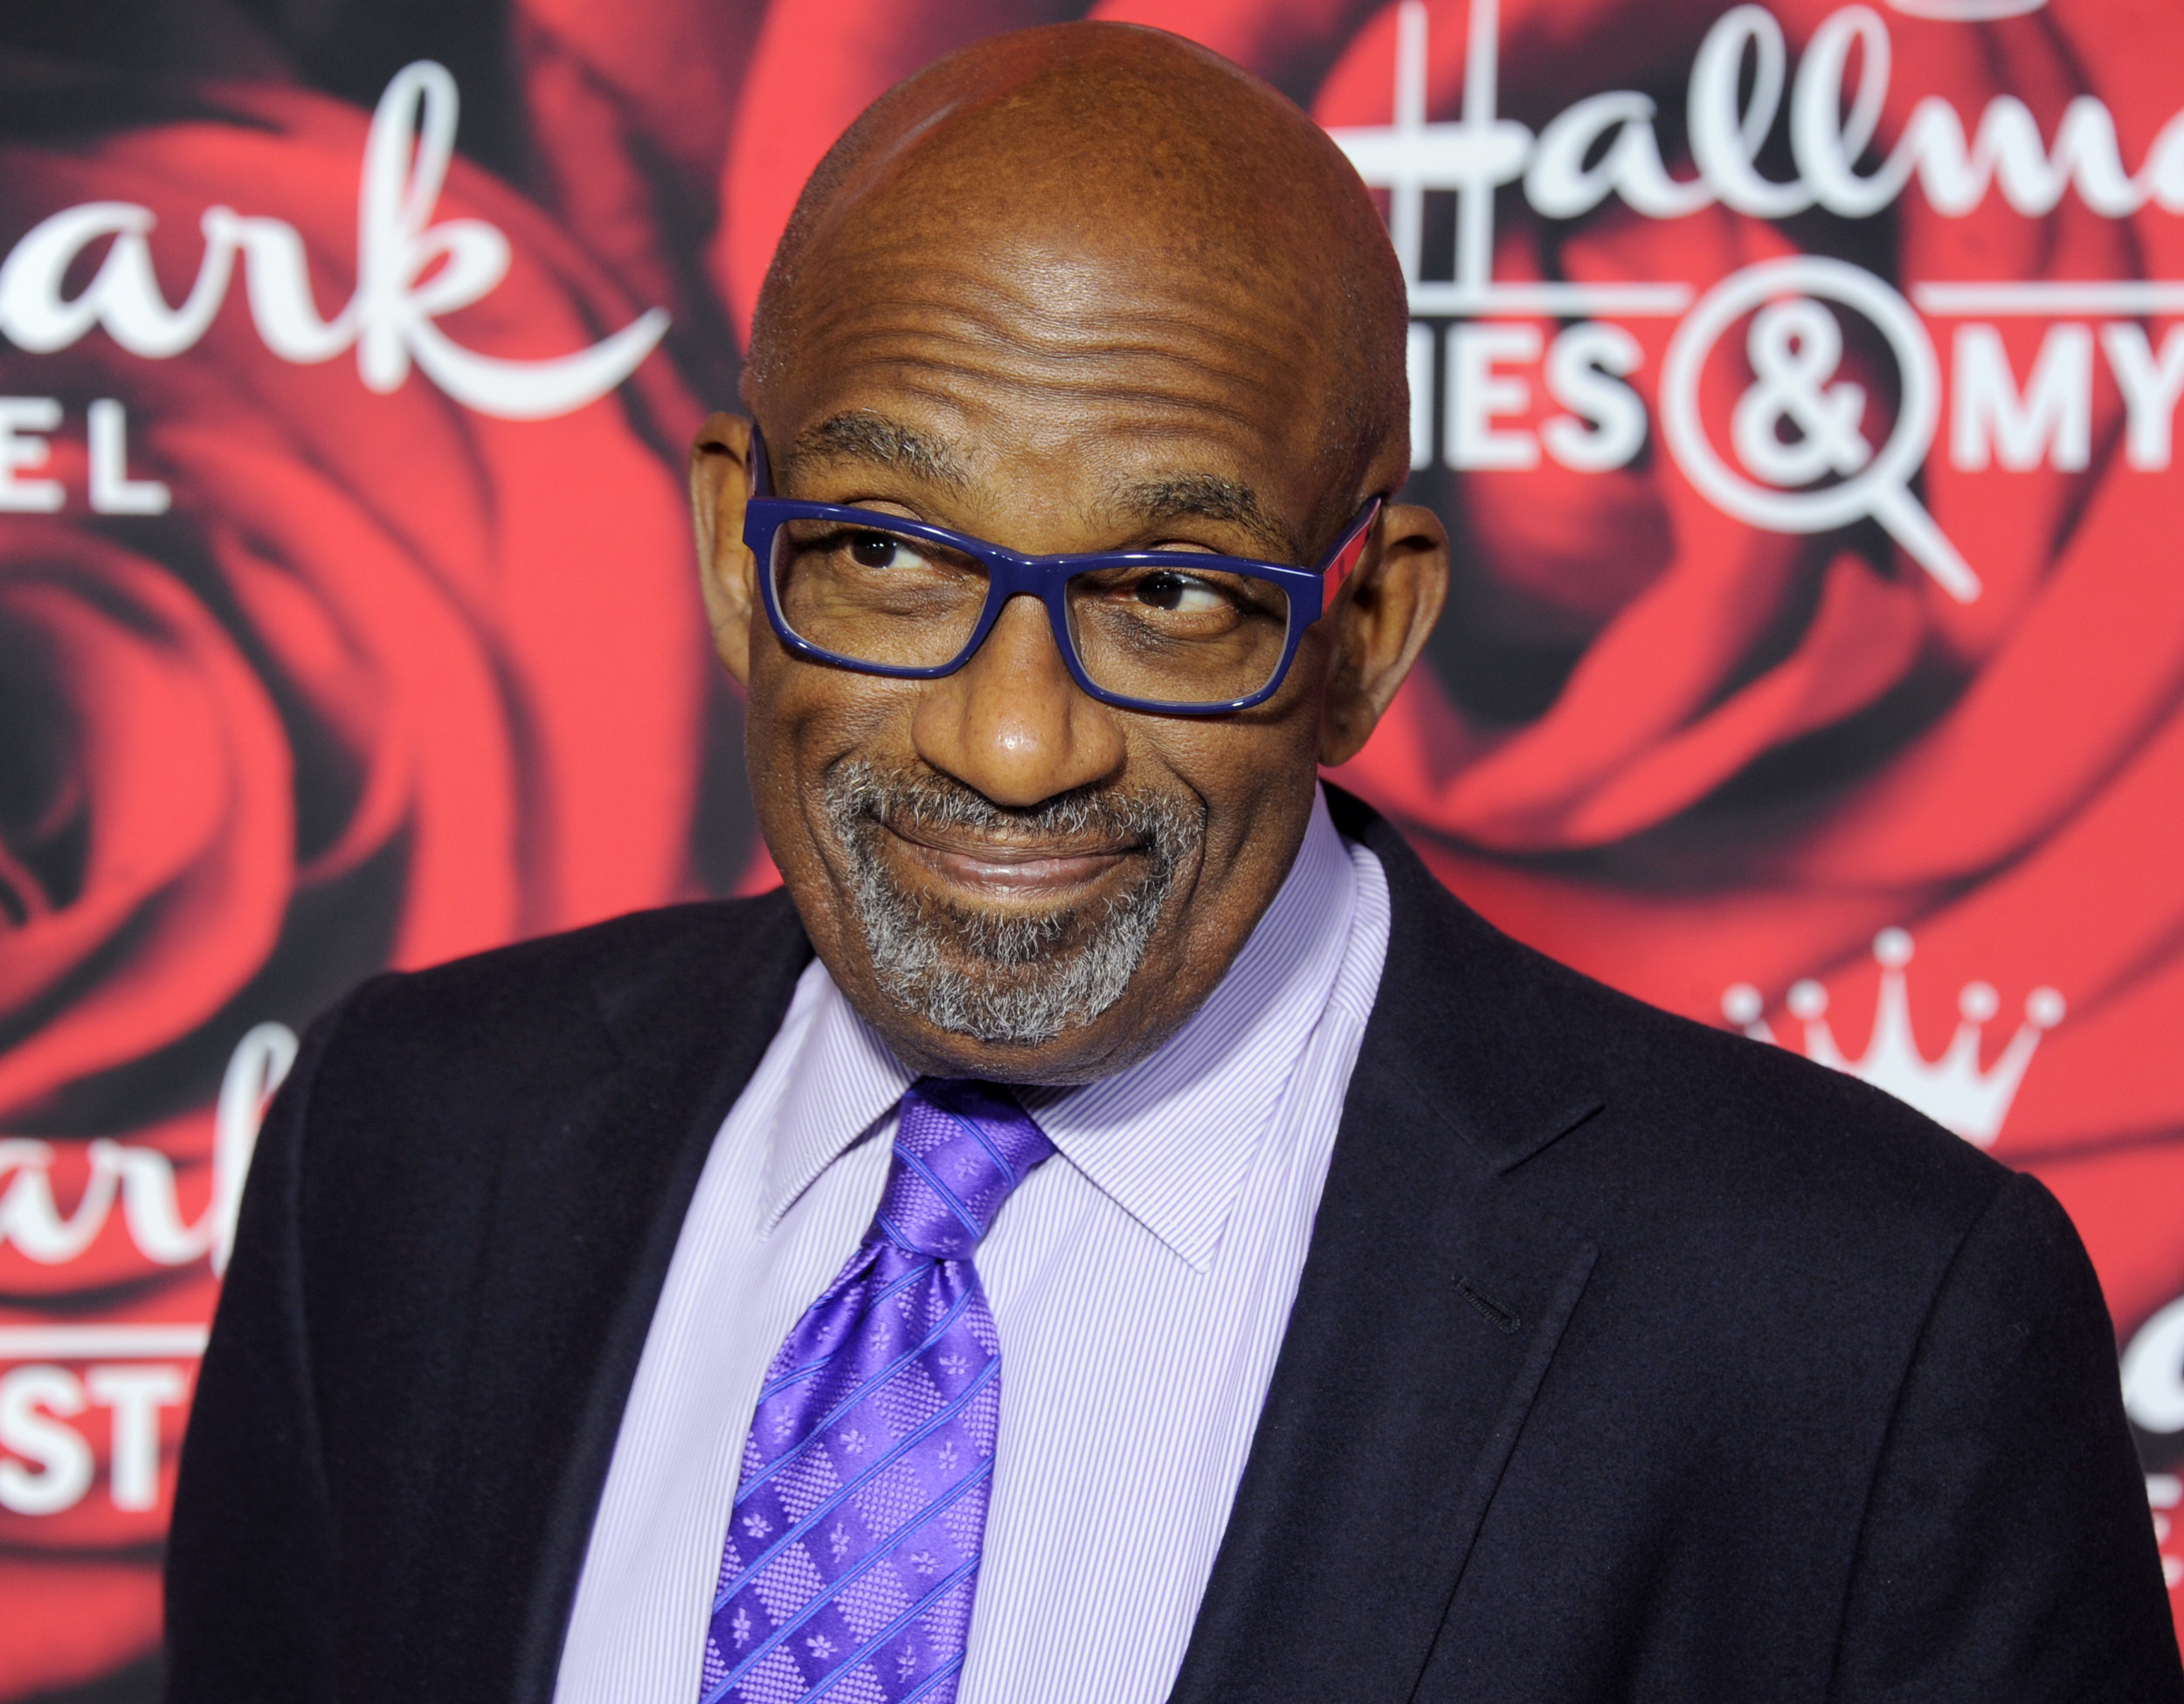 Al Roker Reveals Prostate Cancer Diagnosis Live on Air